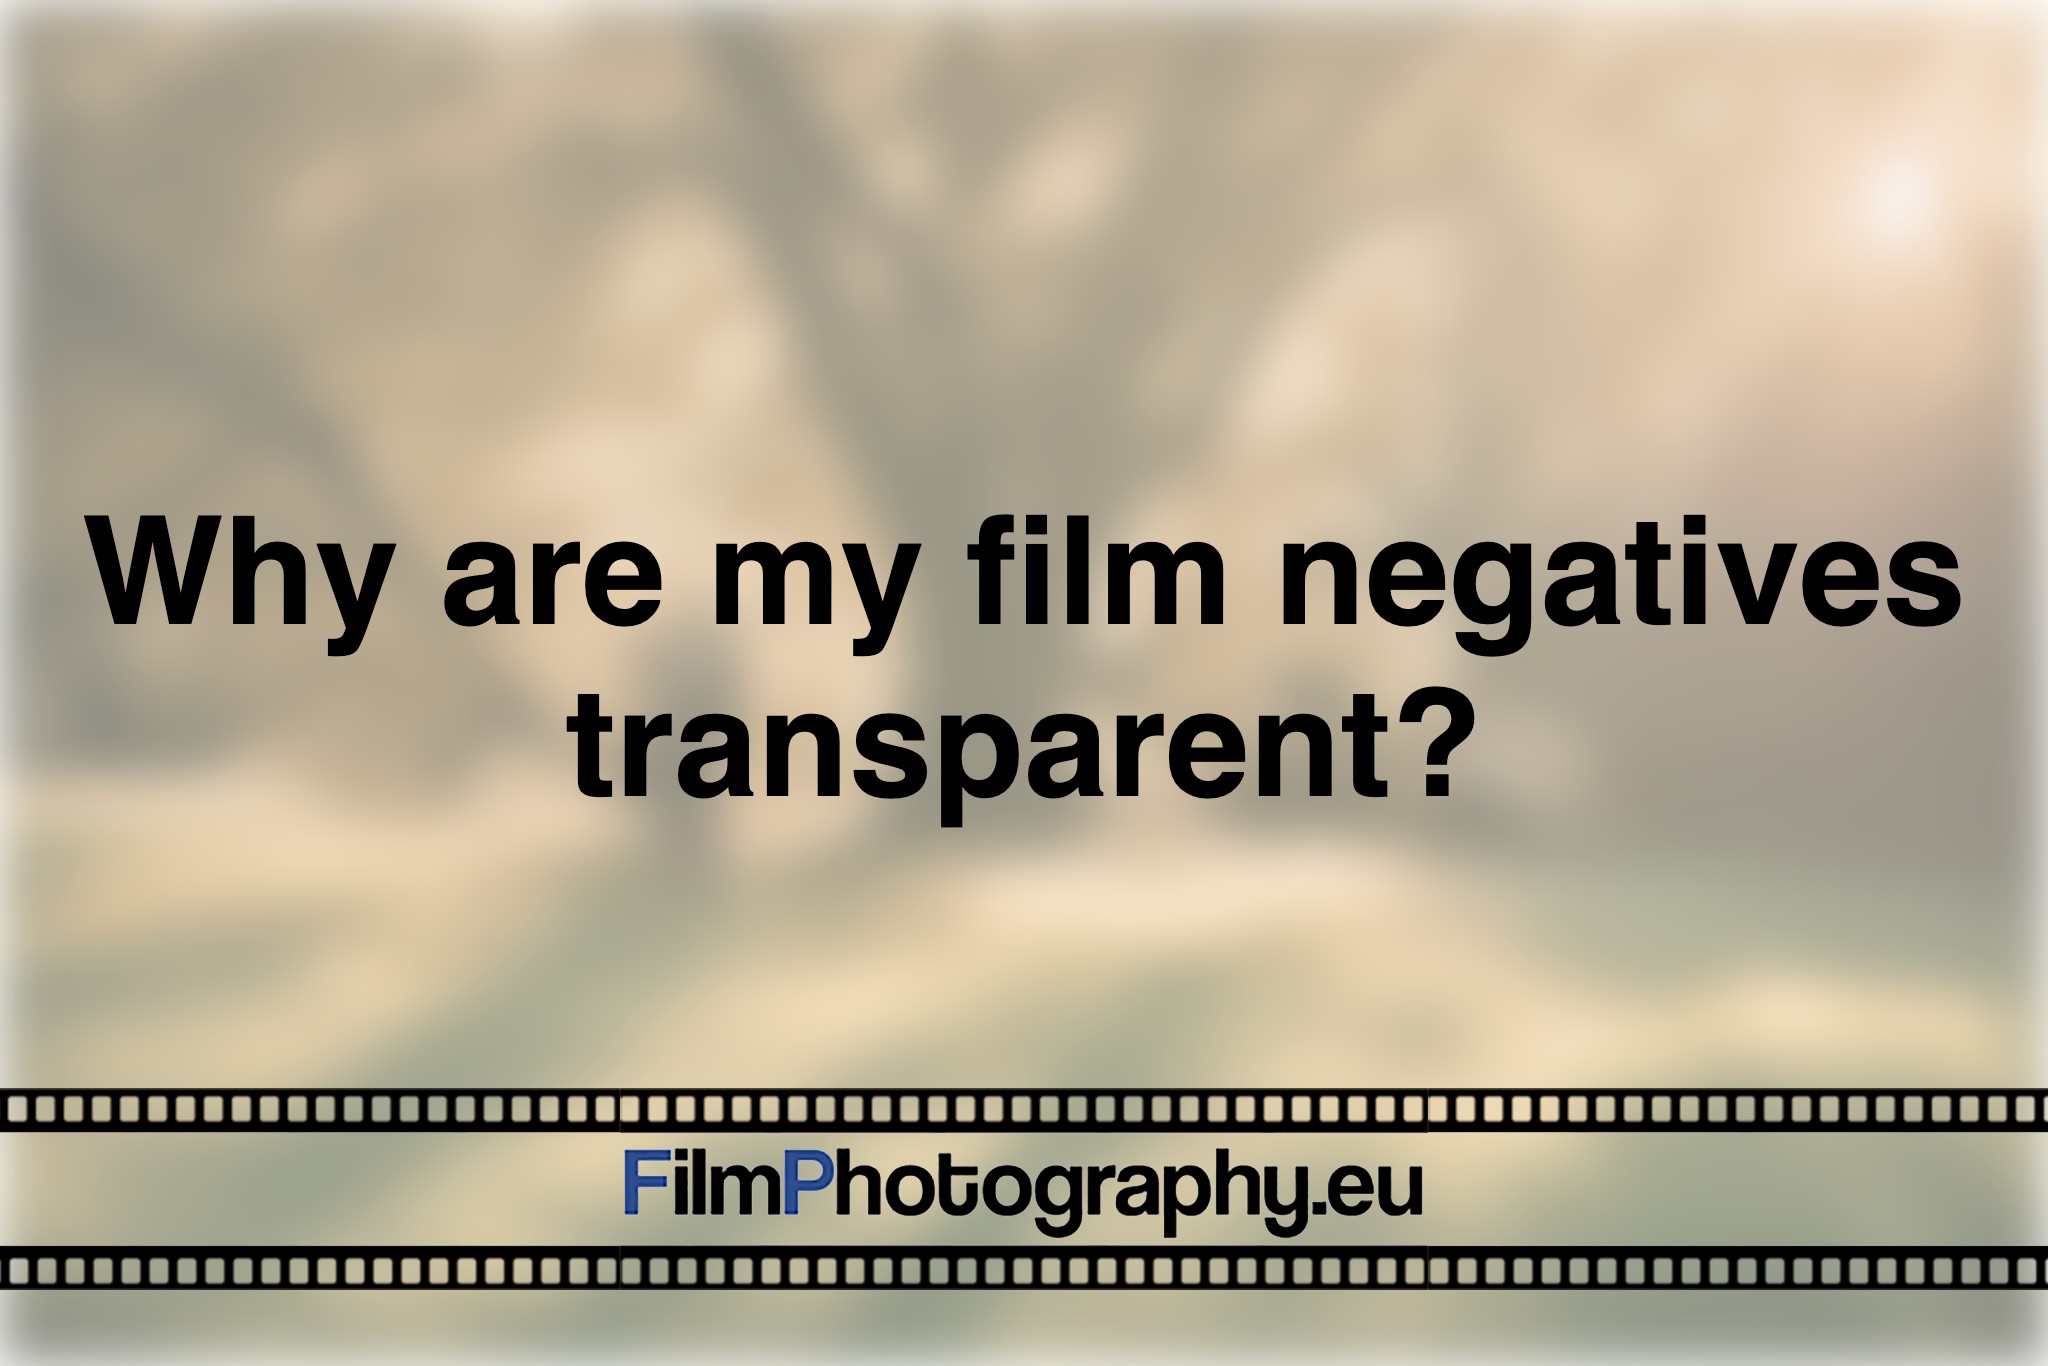 why-are-my-film-negatives-transparent-photo-bnv